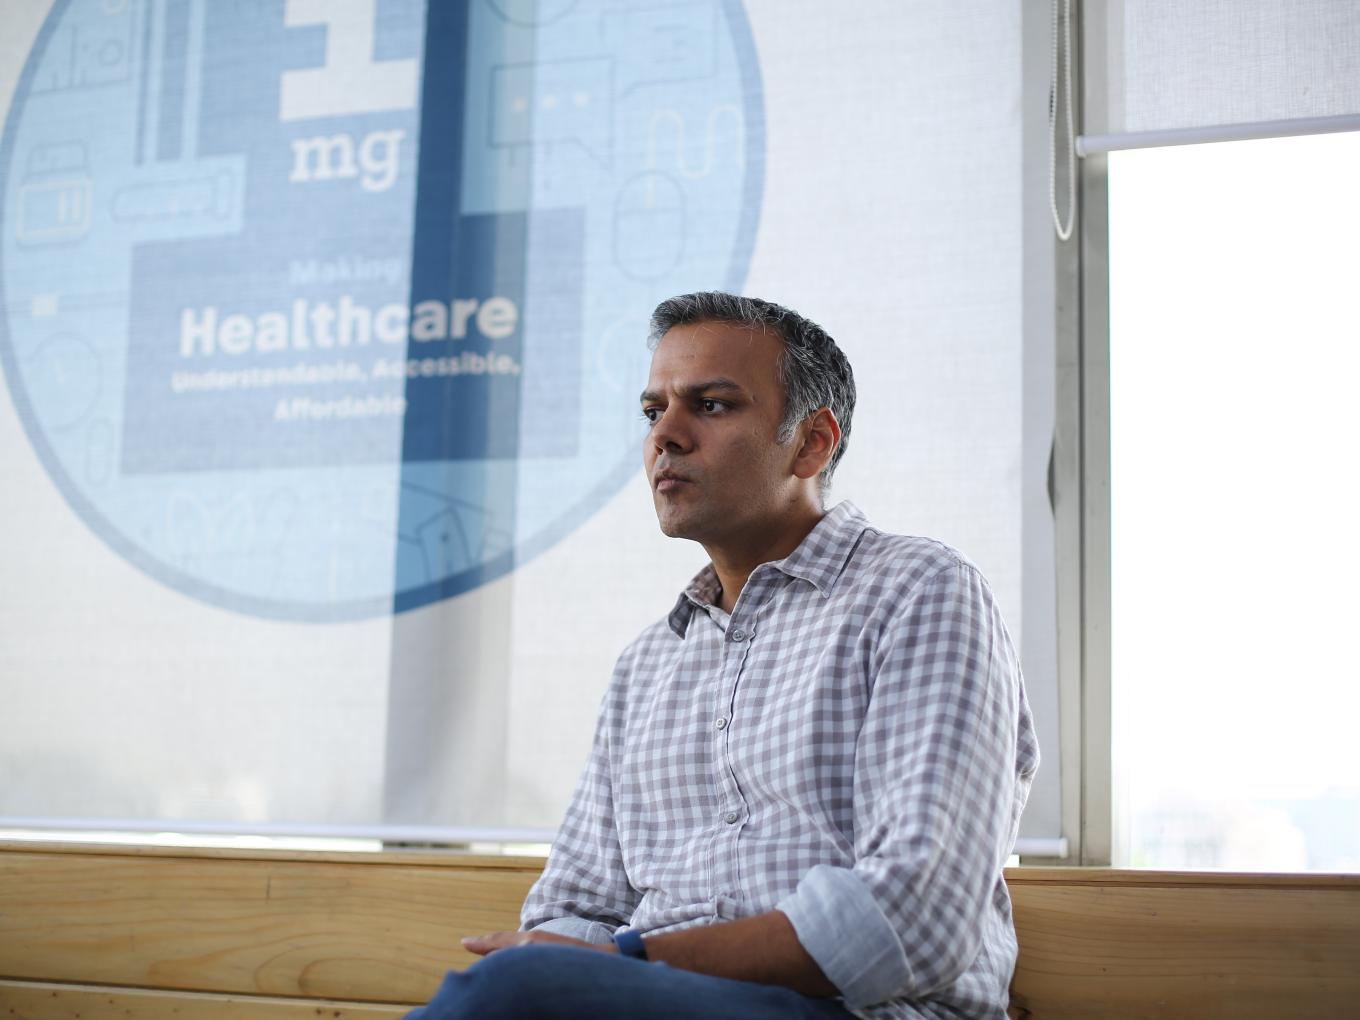 1mg CTO Gaurav Agarwal on scaling up the epharmacy startup